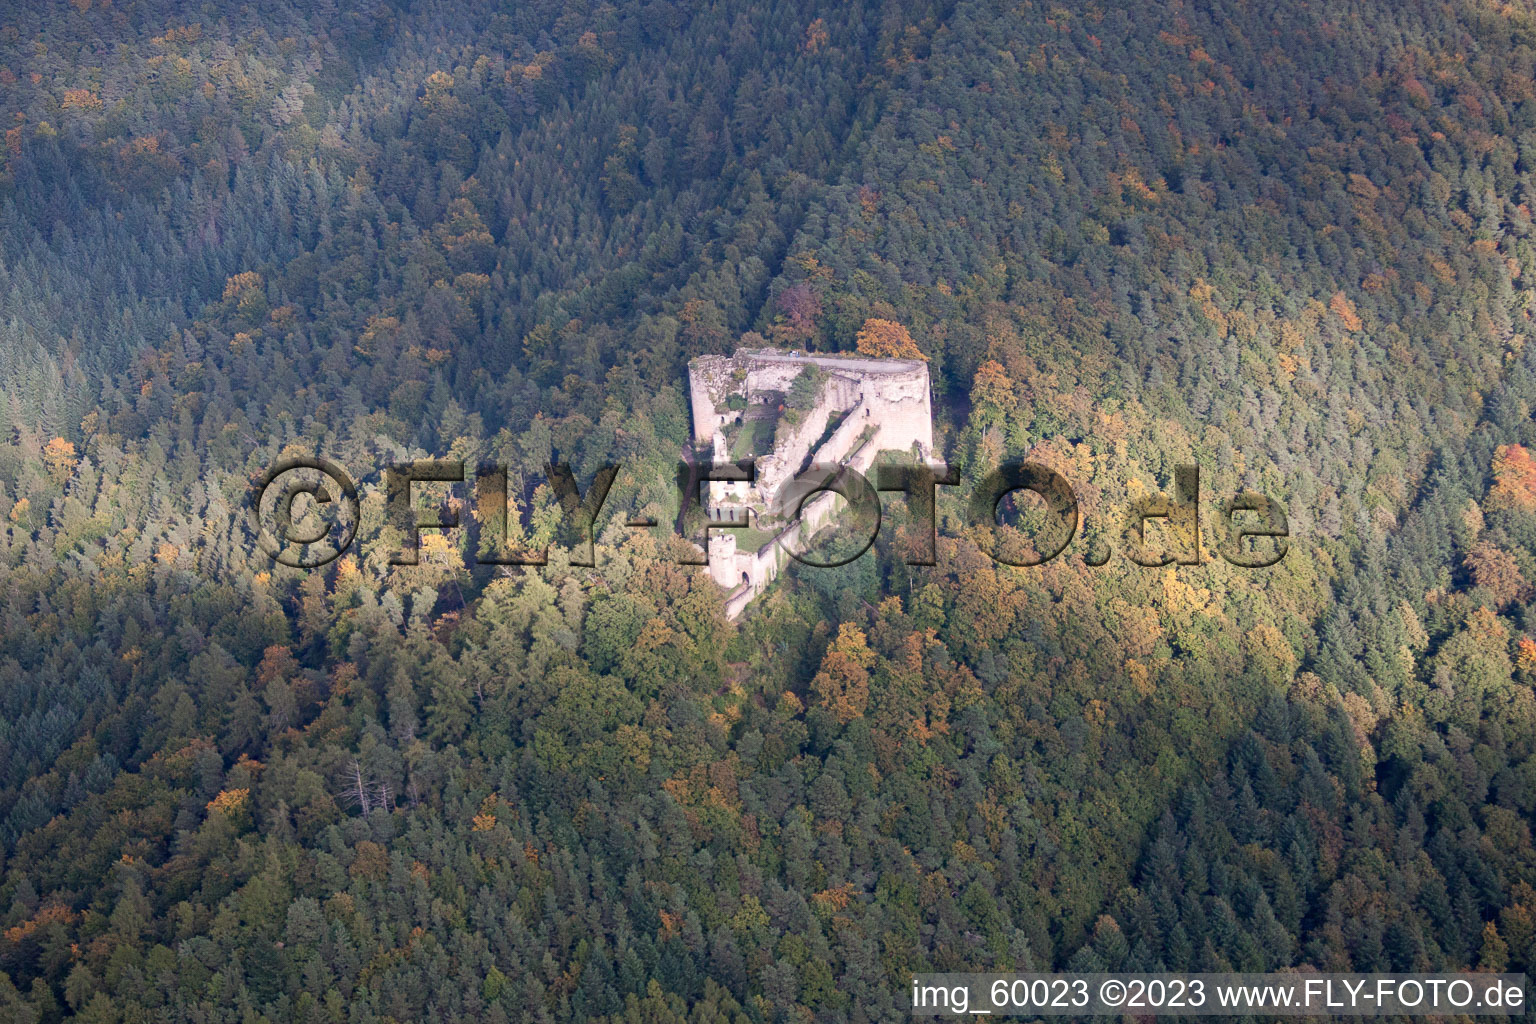 Neuscharfeneck ruins in Dernbach in the state Rhineland-Palatinate, Germany from above